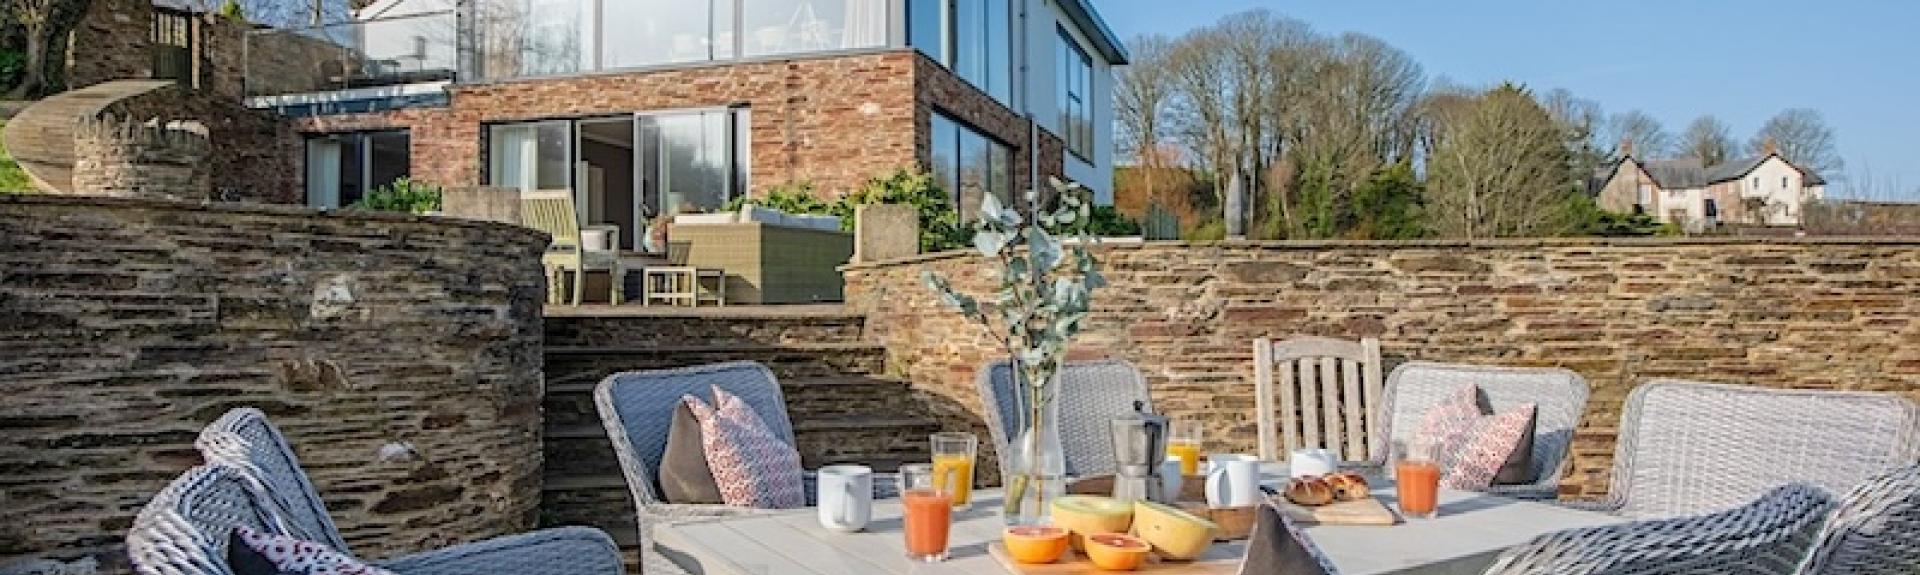 A contemporary country house overlooks a terrace with table laid for meals.